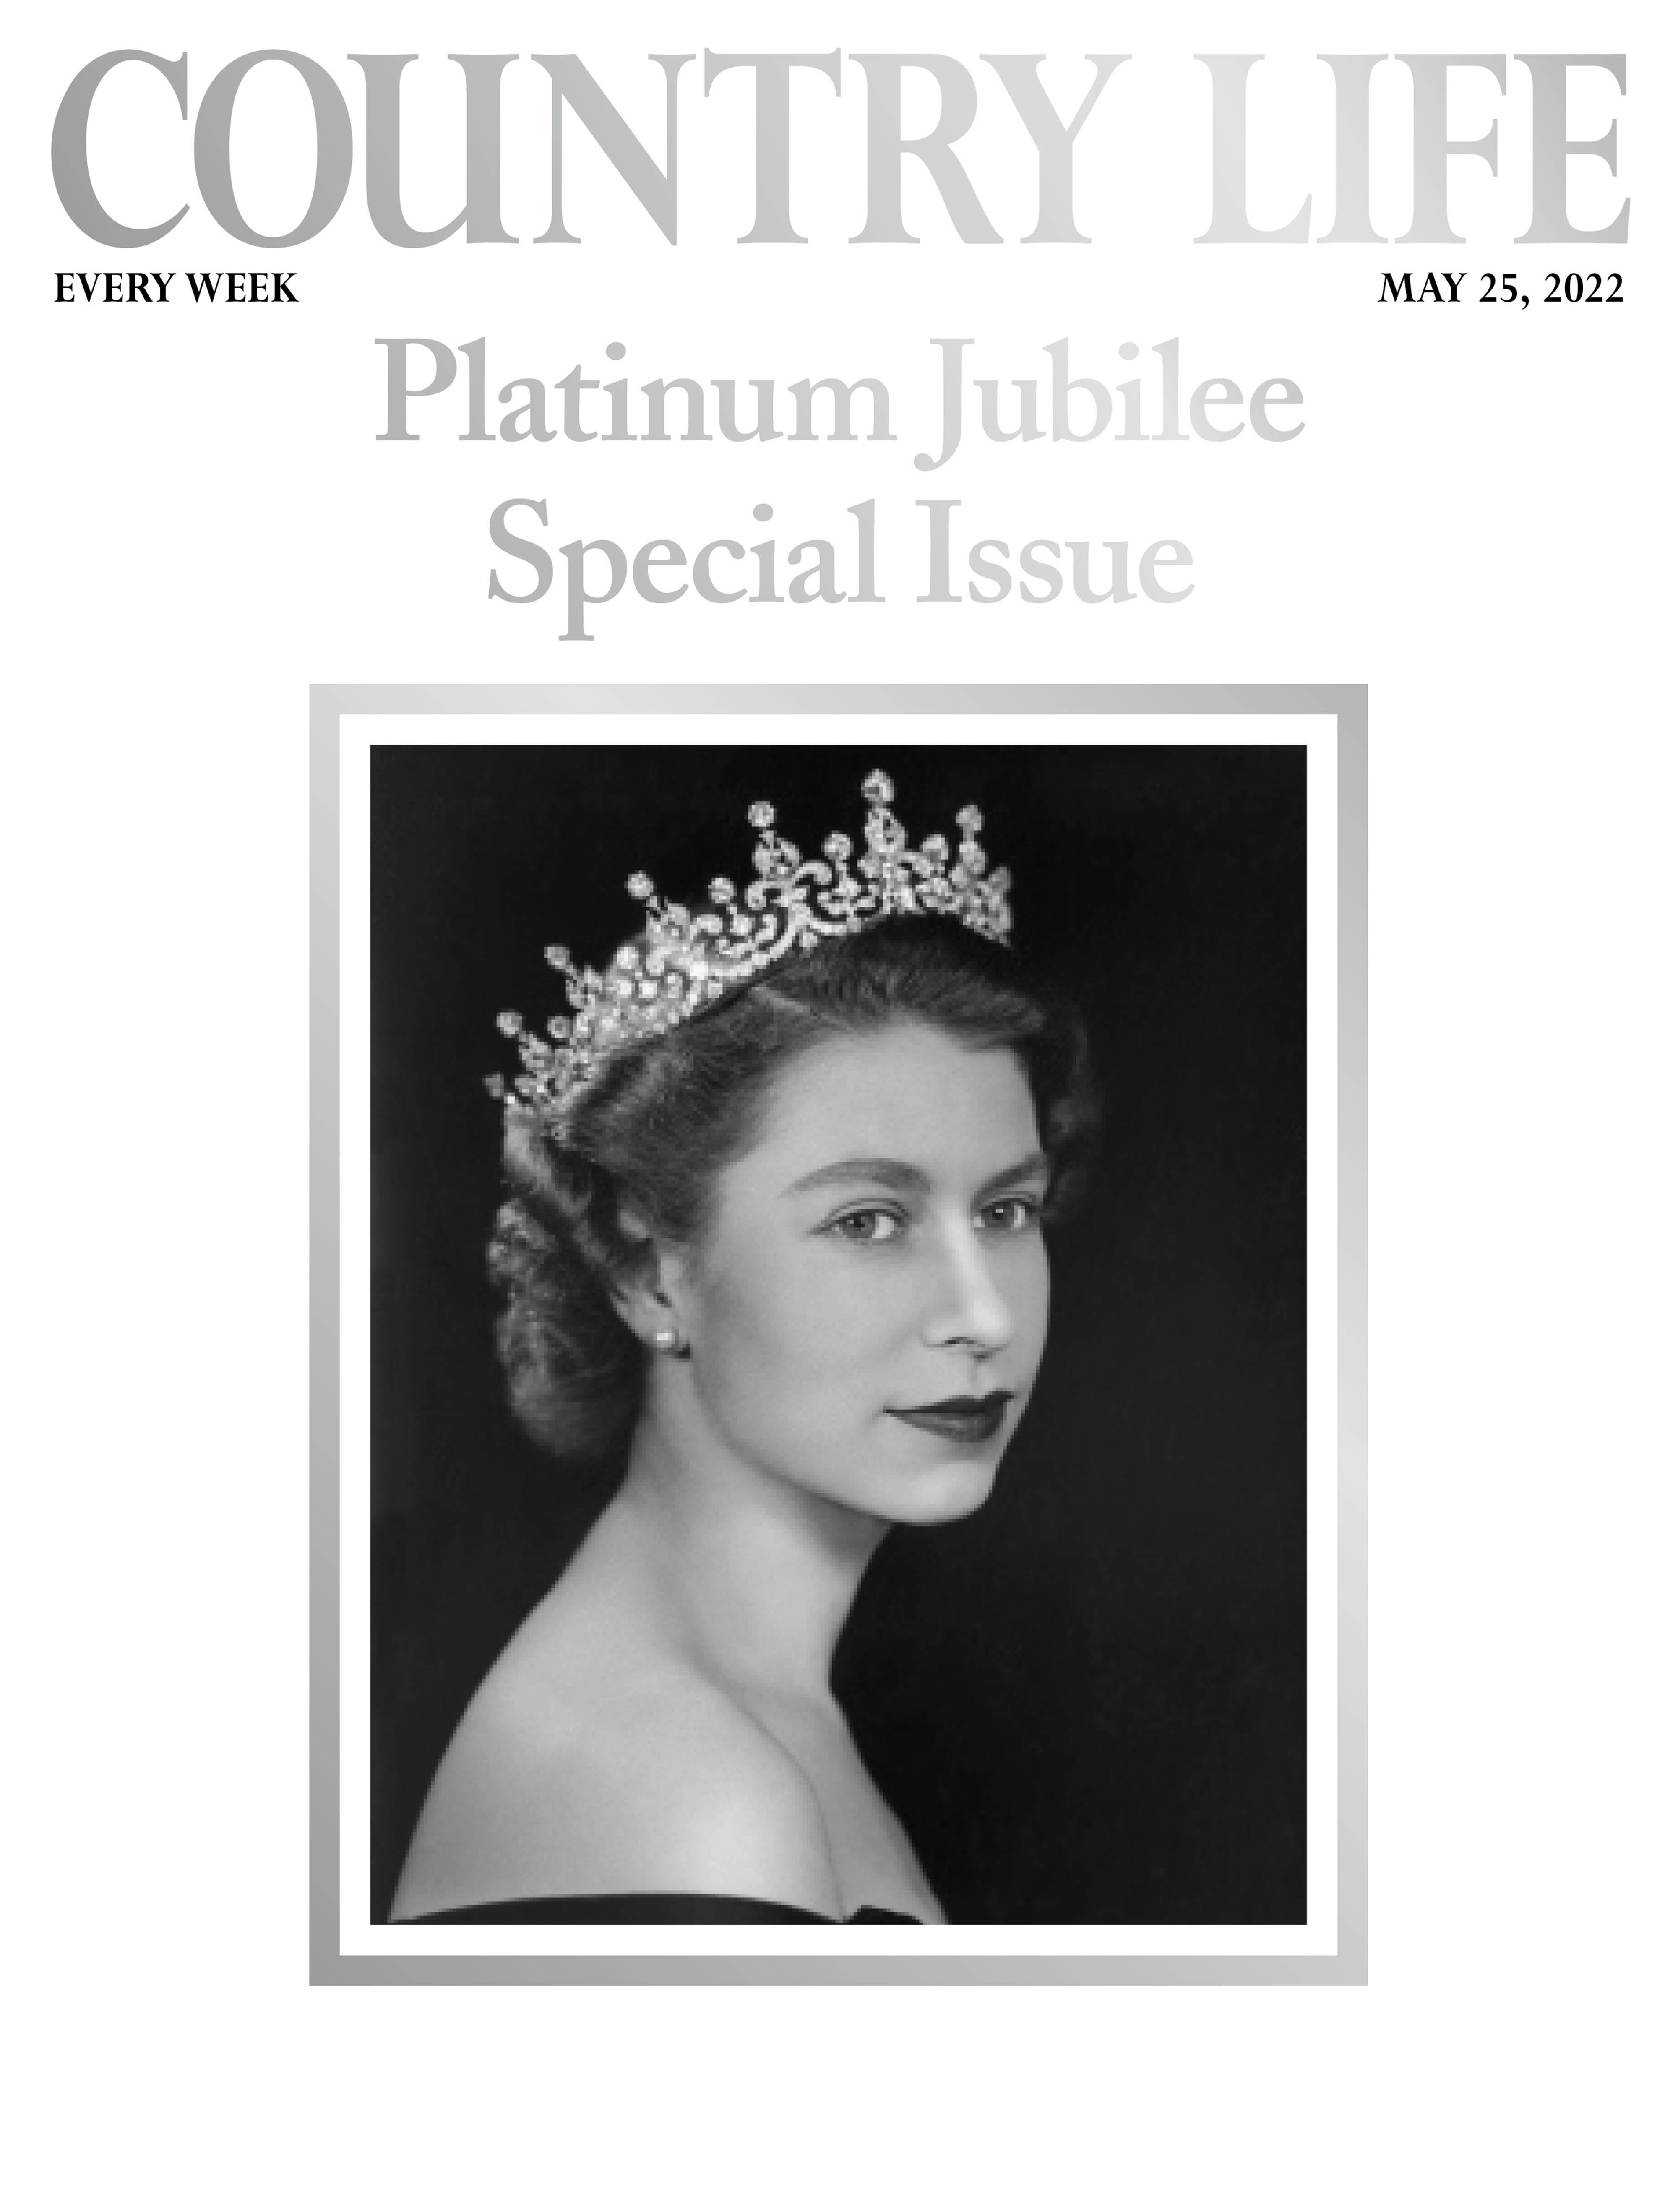 Country Life cover for the Platinum Jubilee edition on sale on May 25 